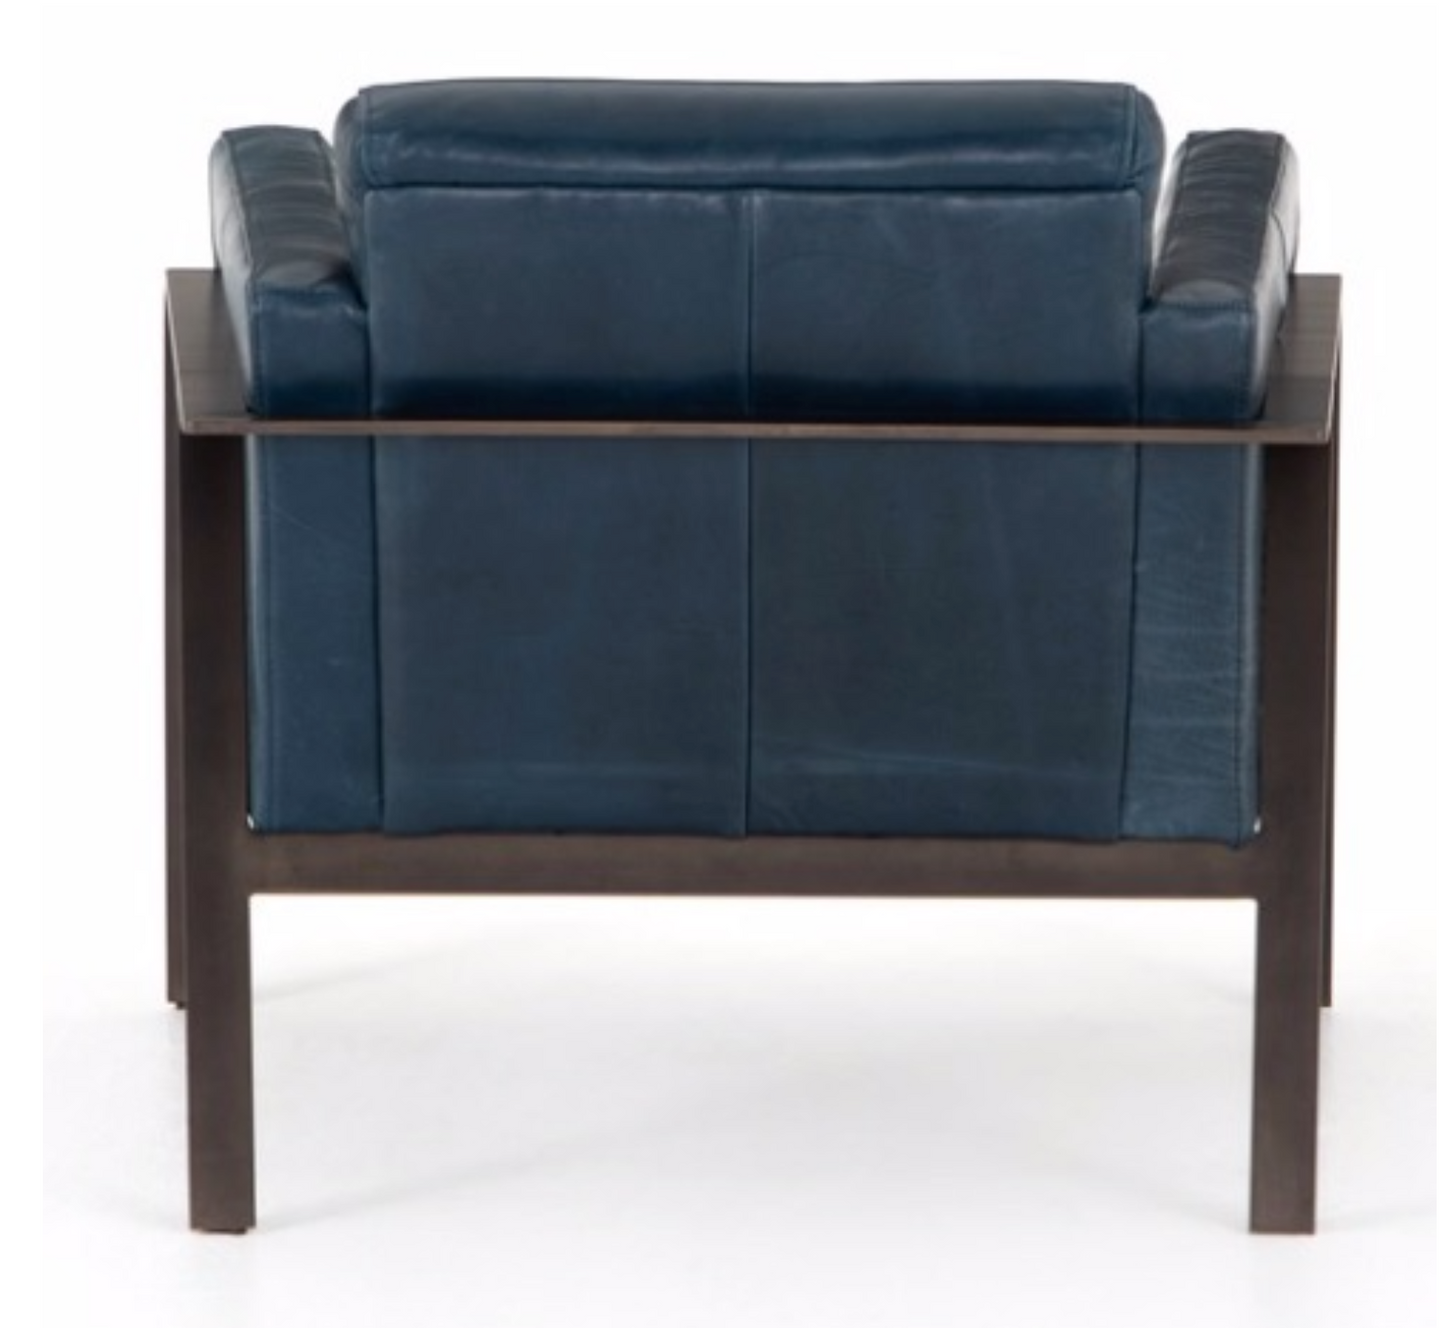 Sapphire blue top grain leather chair with flat bronzed gunmetal frame